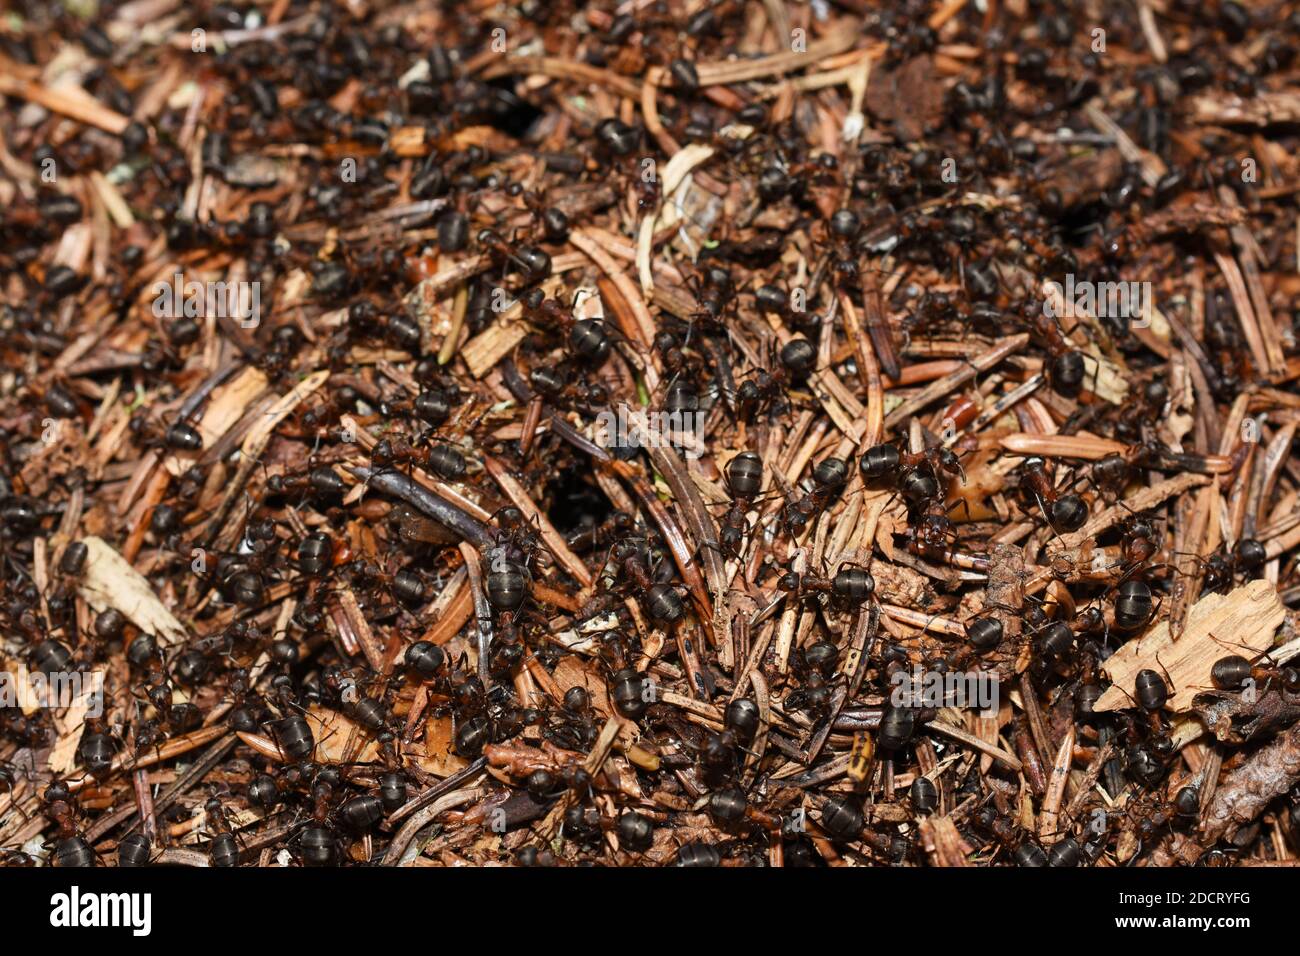 Closeup on red wood ants Formica rufa in their anthill Stock Photo